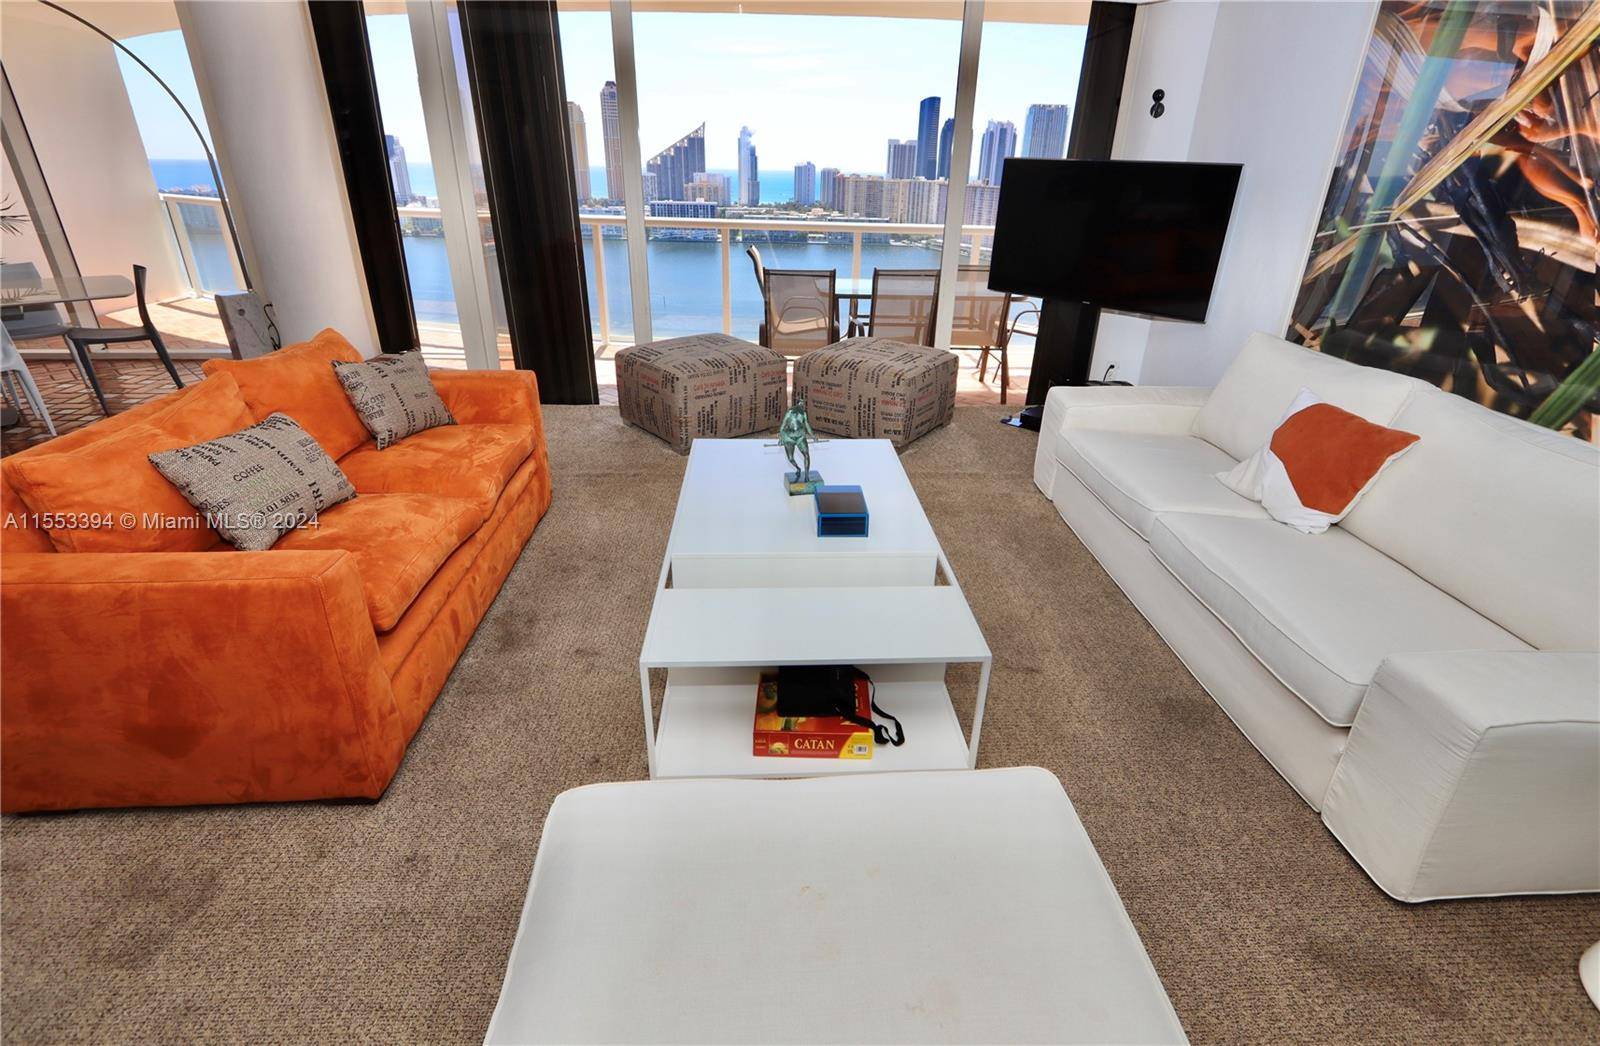 SPECTACULAR VIEWS FROM THIS DUPLEX HIGH IN THE SKY !